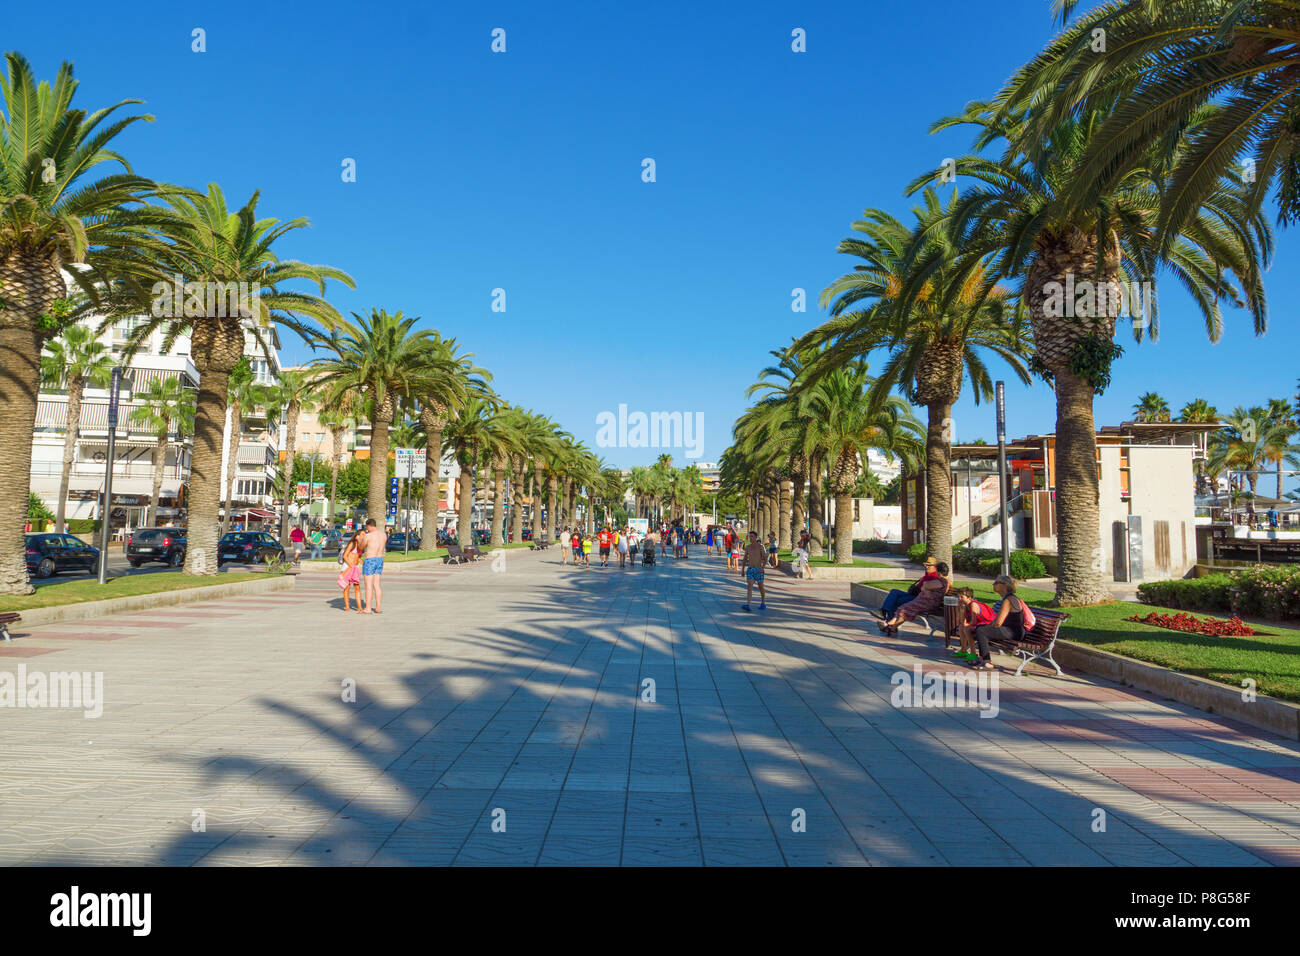 Salou, Spain - August 13, 2017: Salou is one of the largest tourist cities in Spain. Street for pedestrian walks. Stock Photo